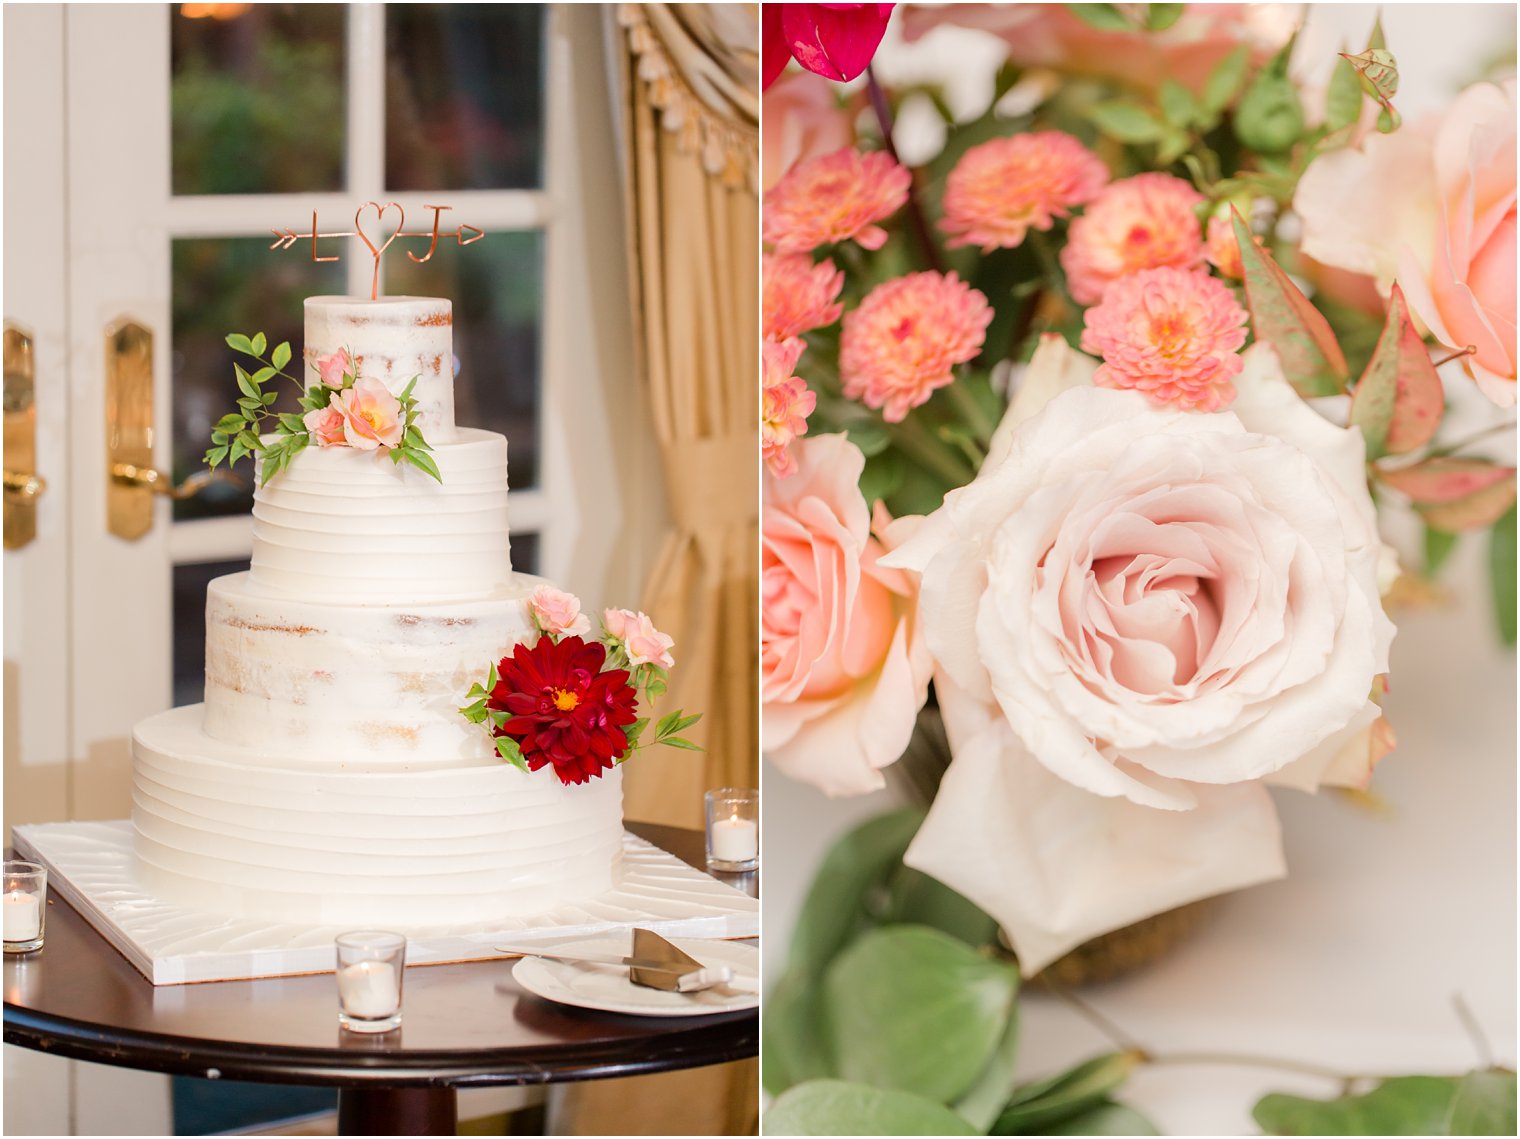 naked wedding cake by Palermo's Bakery at Olde Mill Inn photographed by Idalia Photography